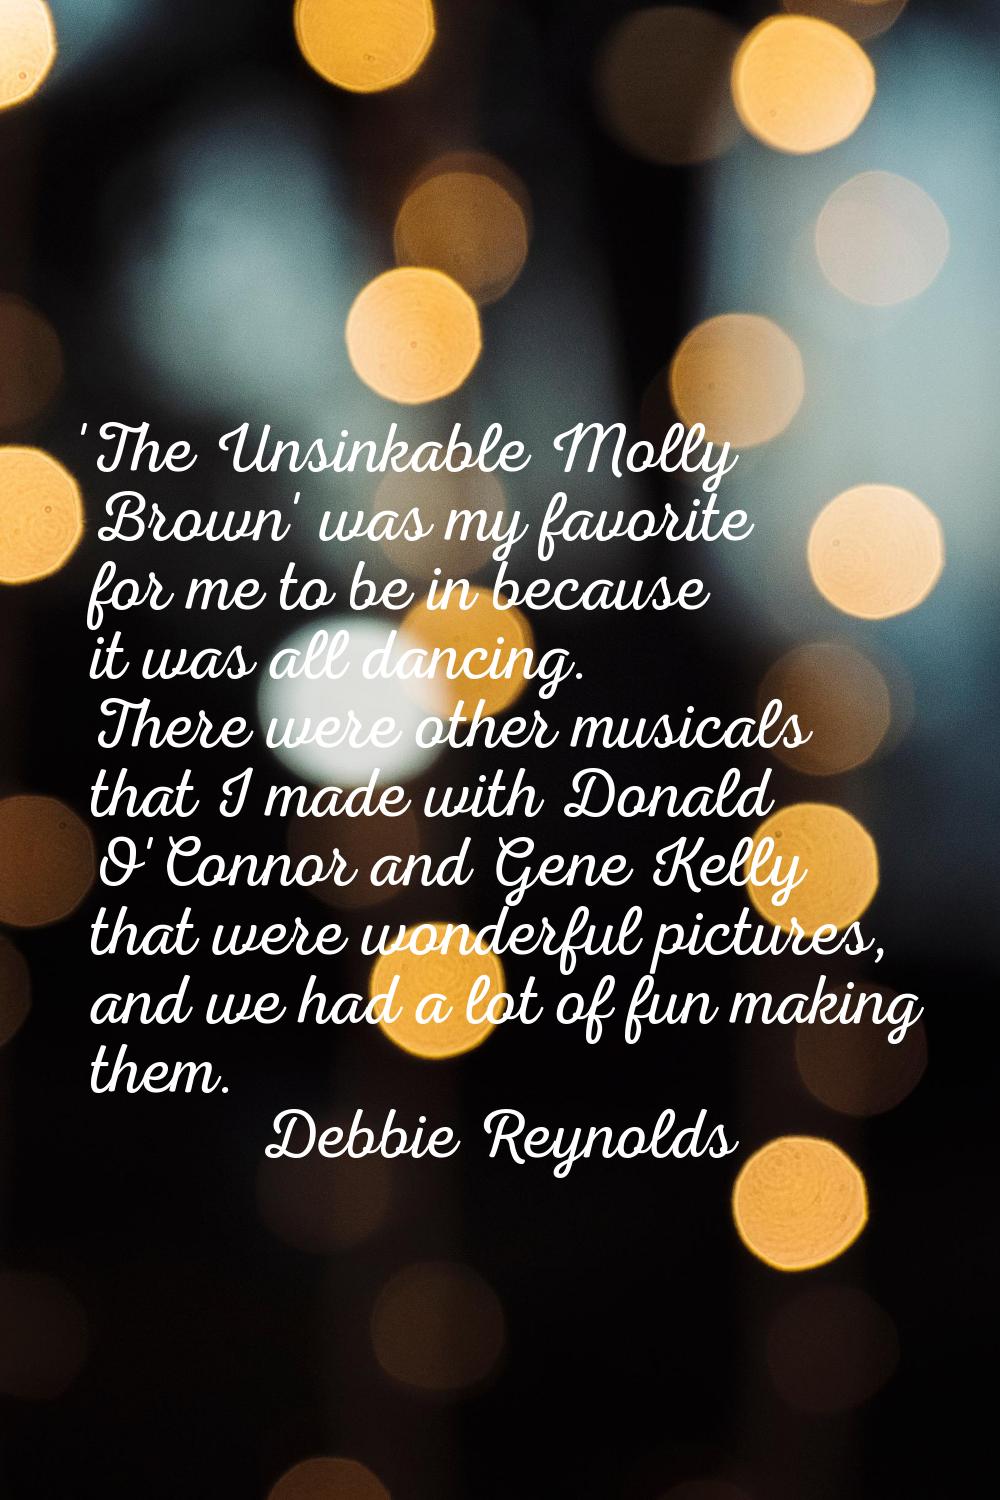 'The Unsinkable Molly Brown' was my favorite for me to be in because it was all dancing. There were